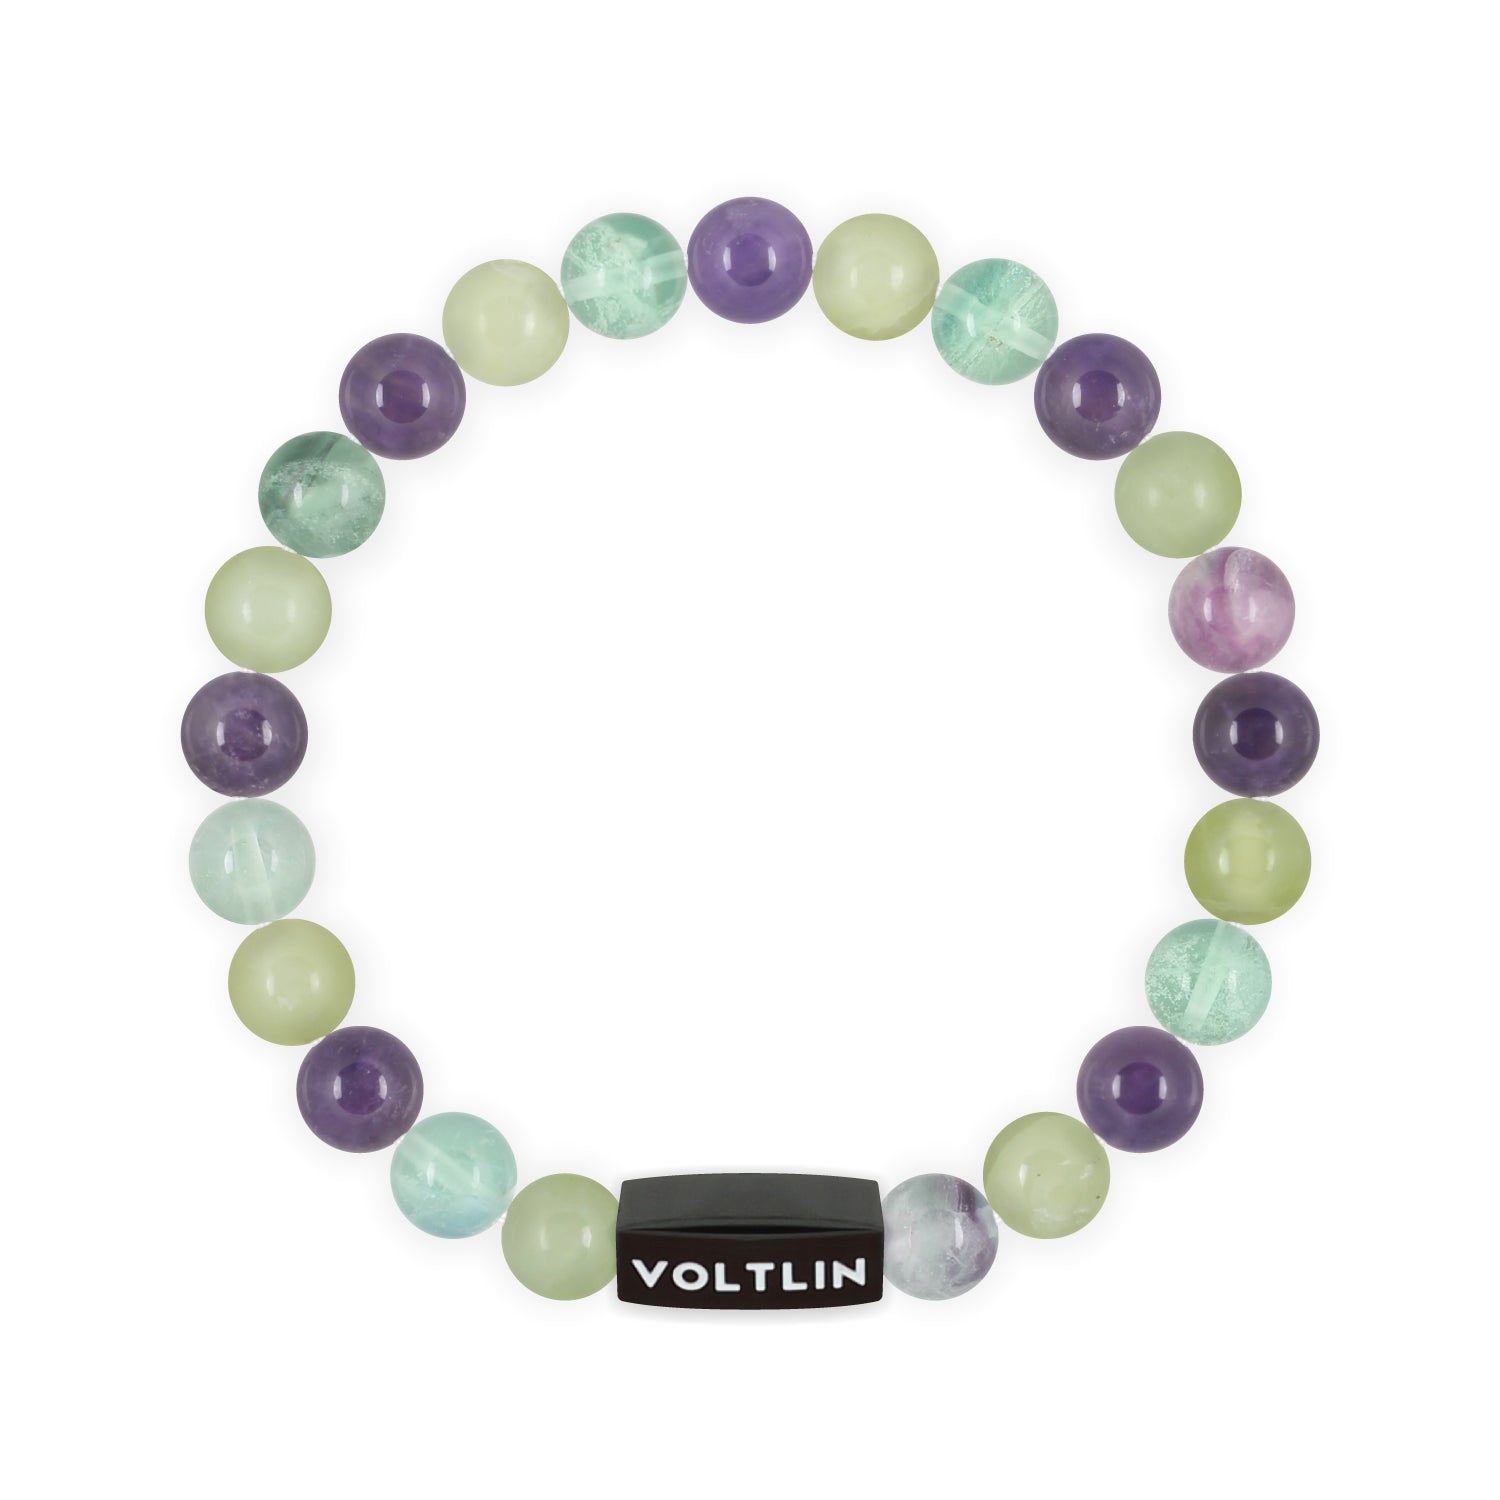 Front view of an 8mm Virgo Zodiac crystal beaded stretch bracelet with black stainless steel logo bead made by Voltlin